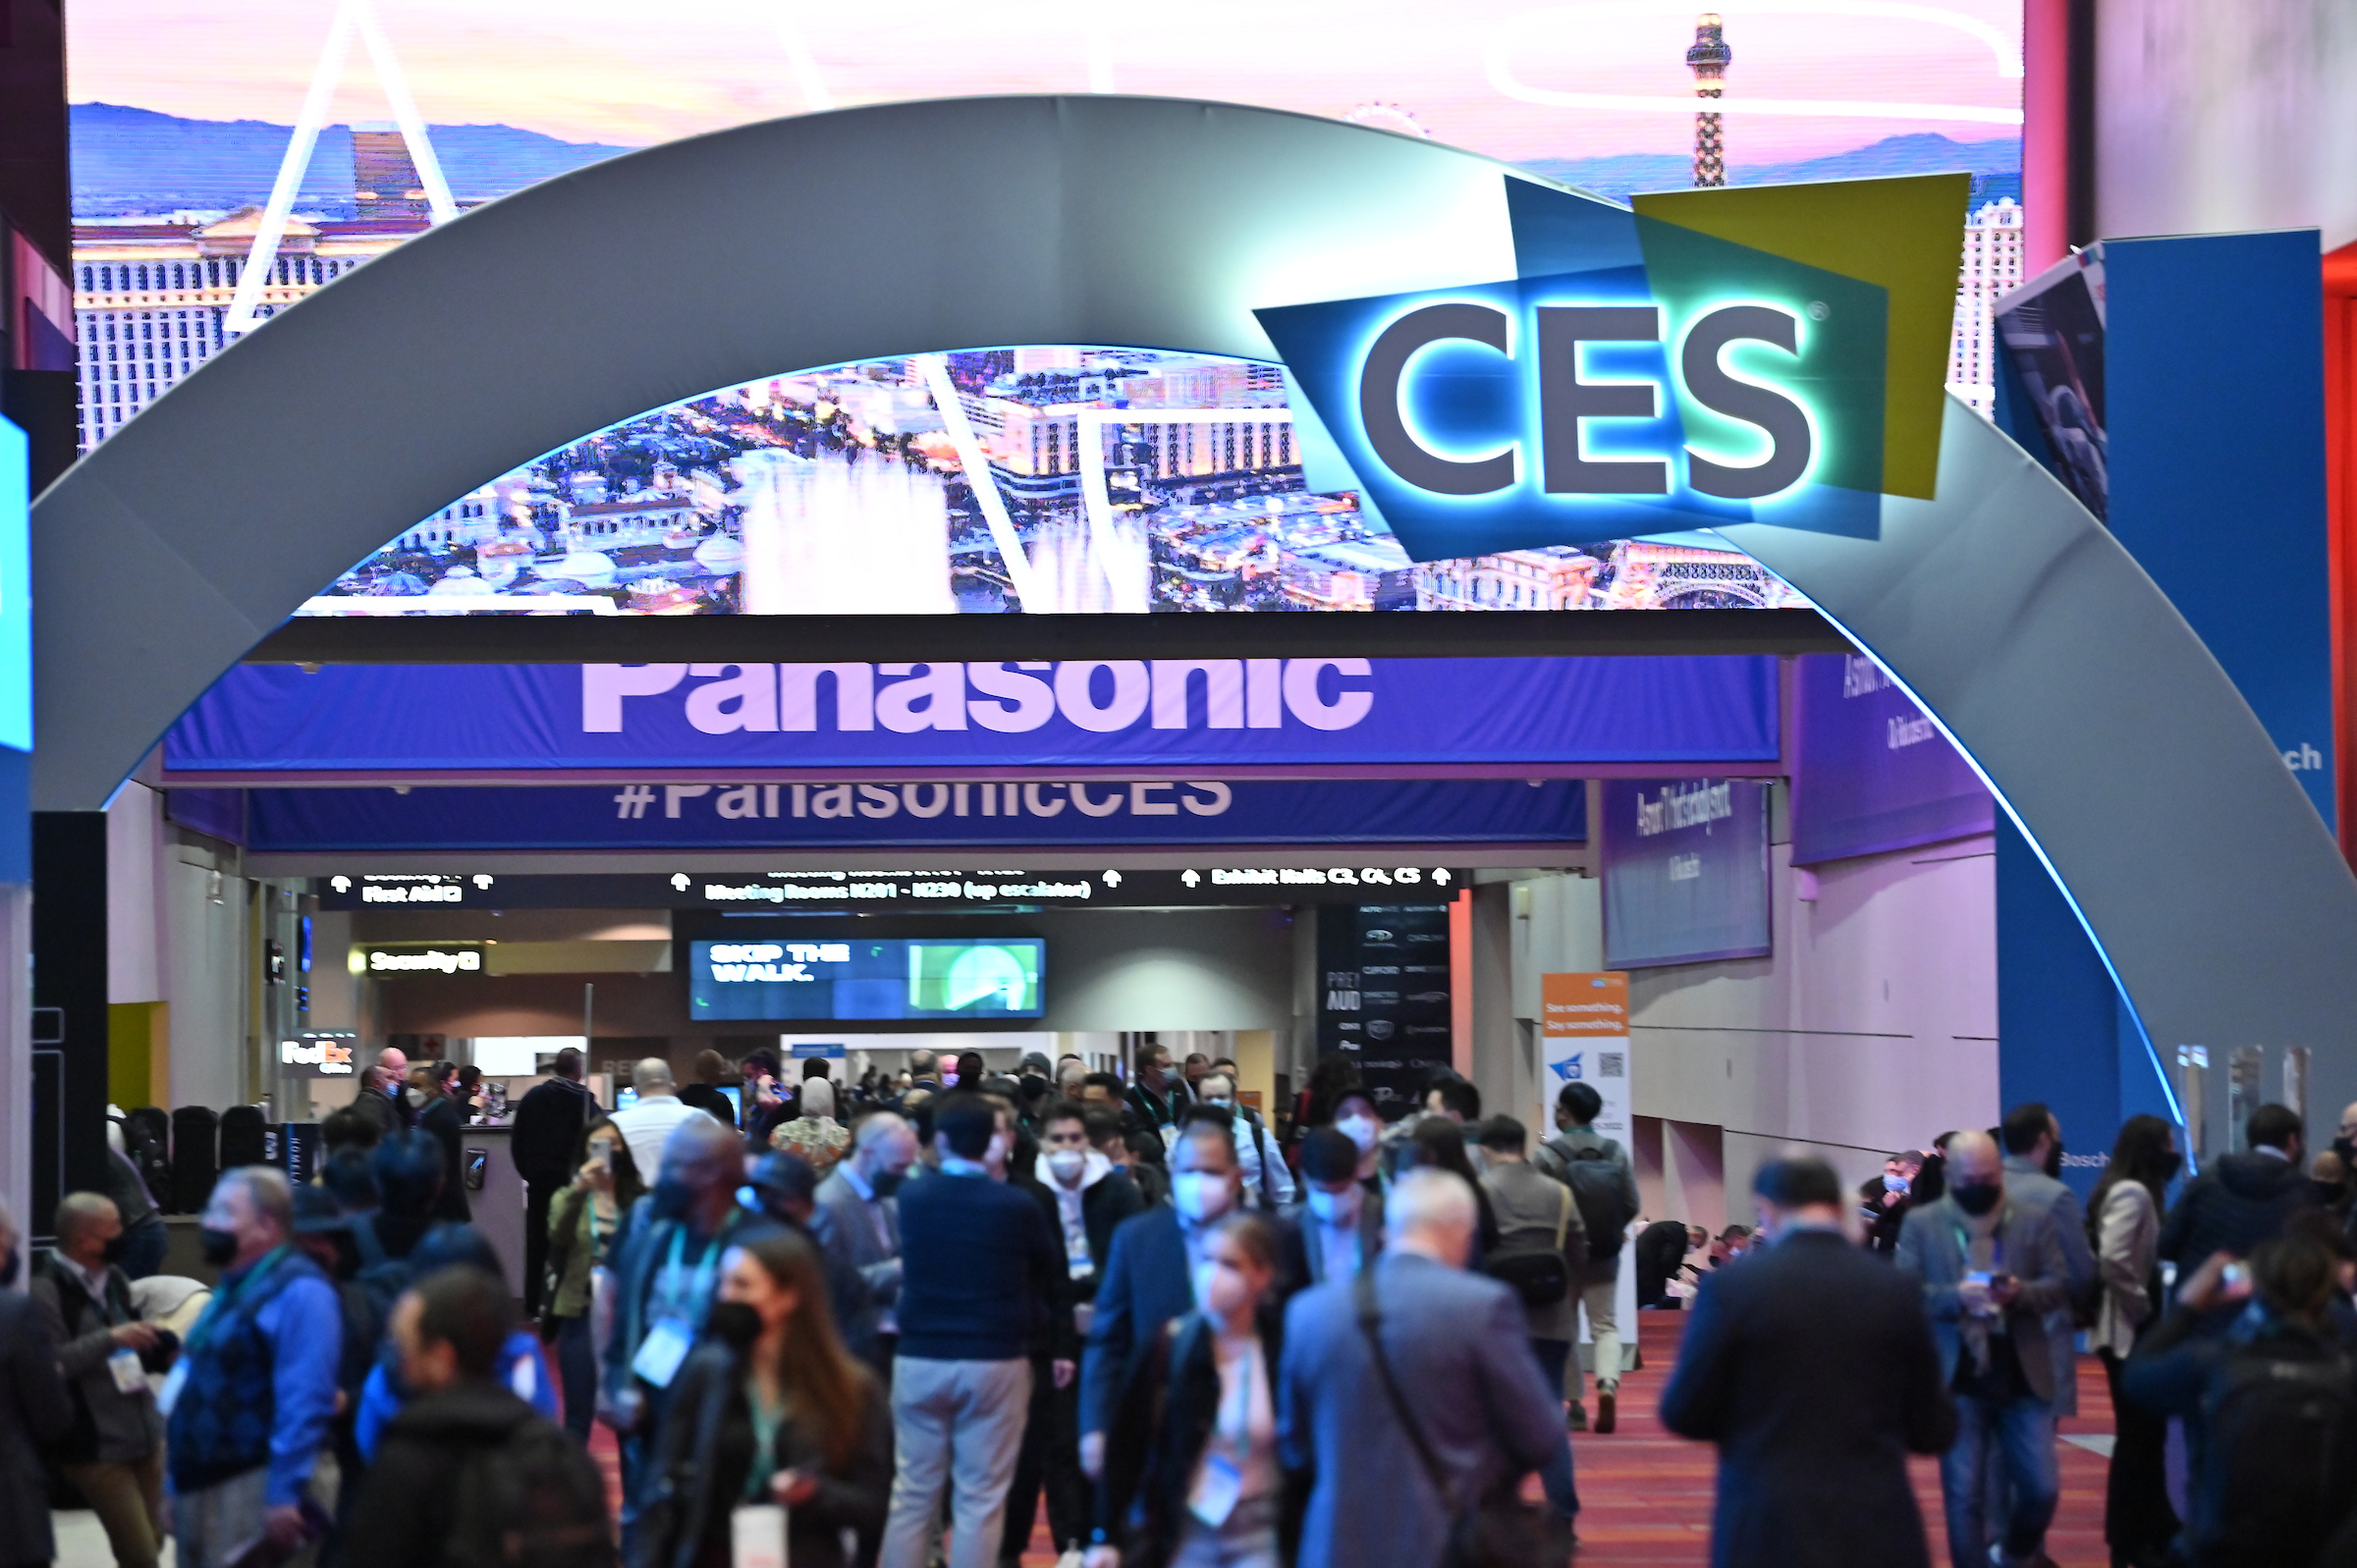 CES attendees at CES trade show.